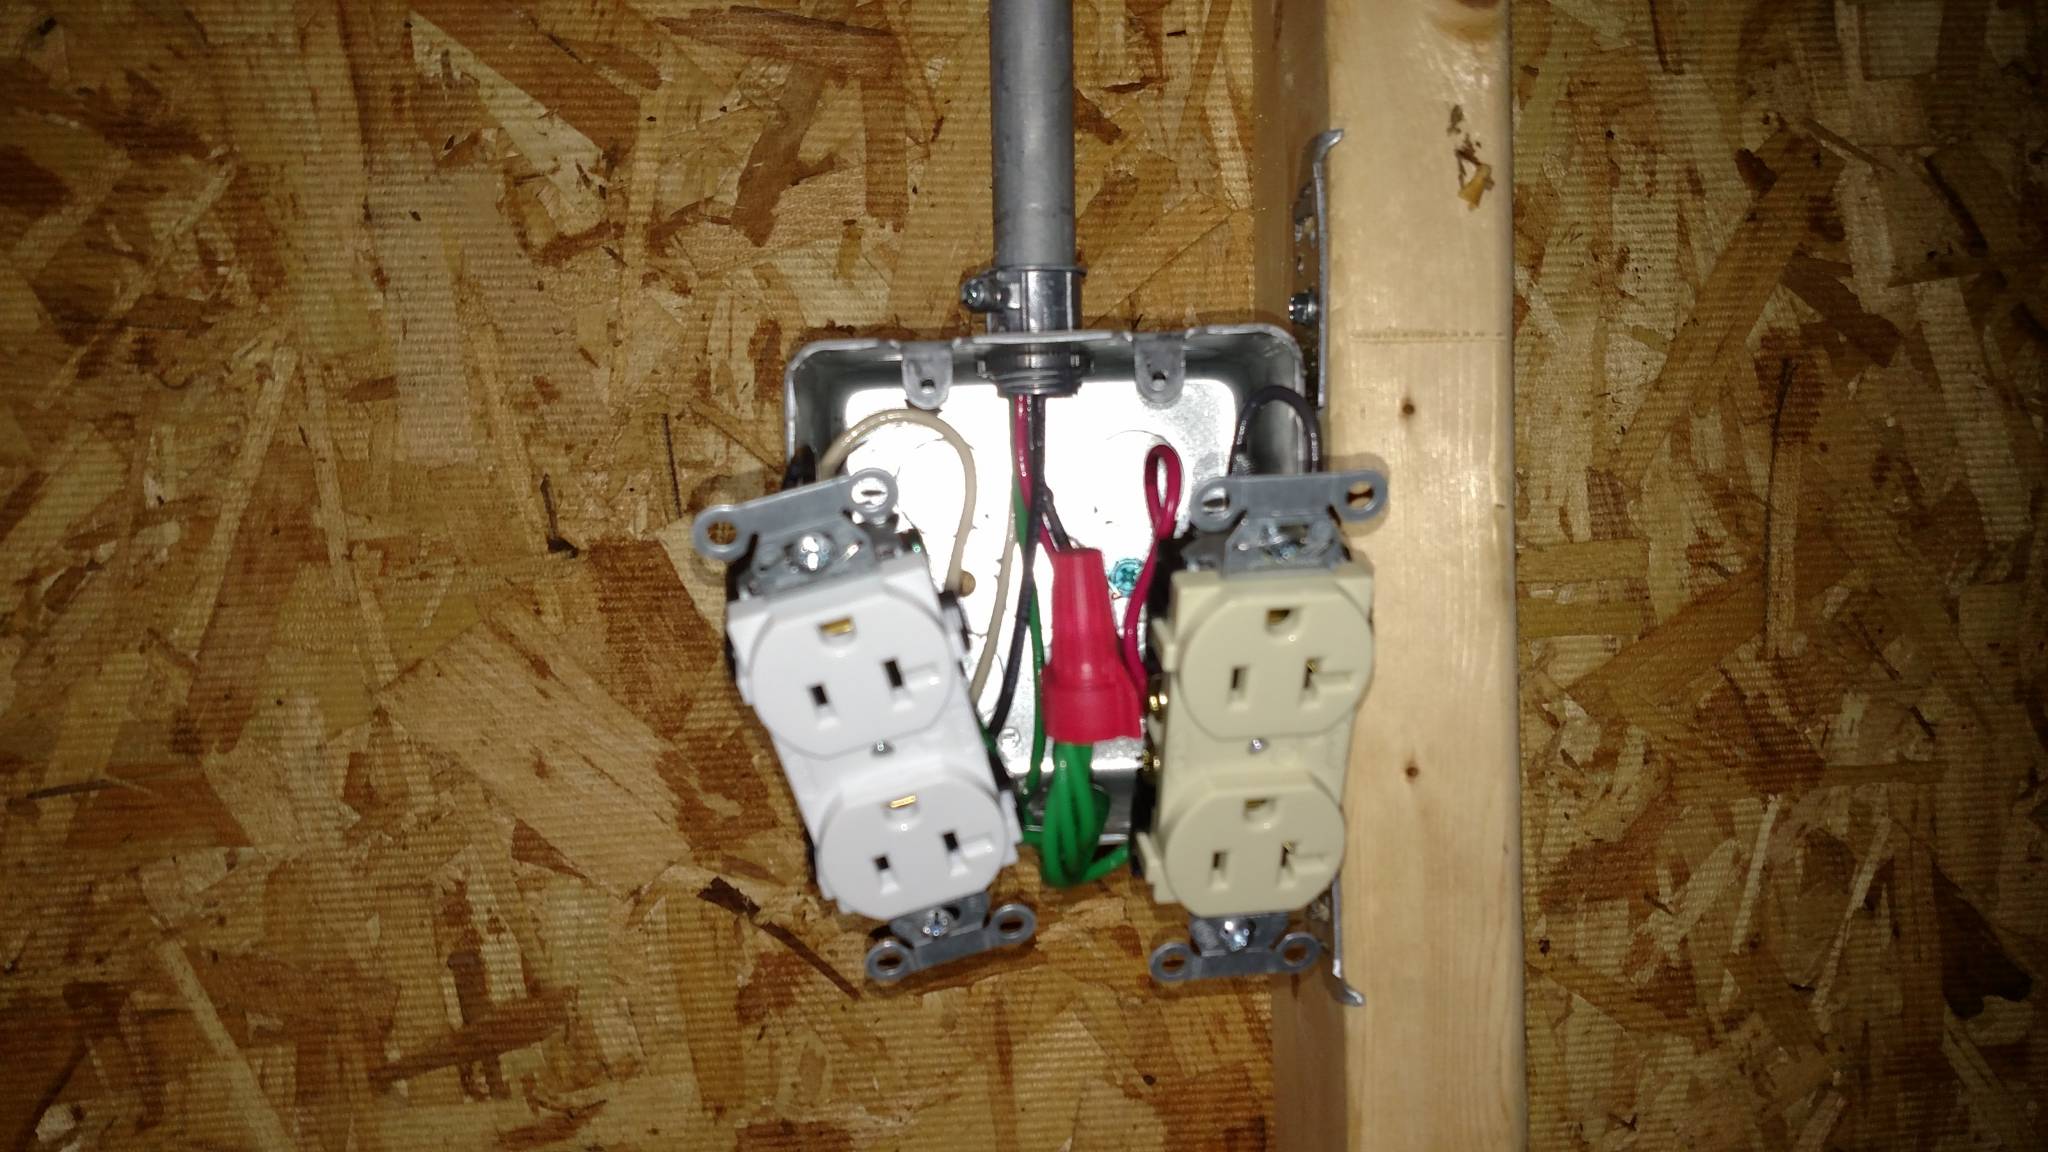 Dual circuit outlets